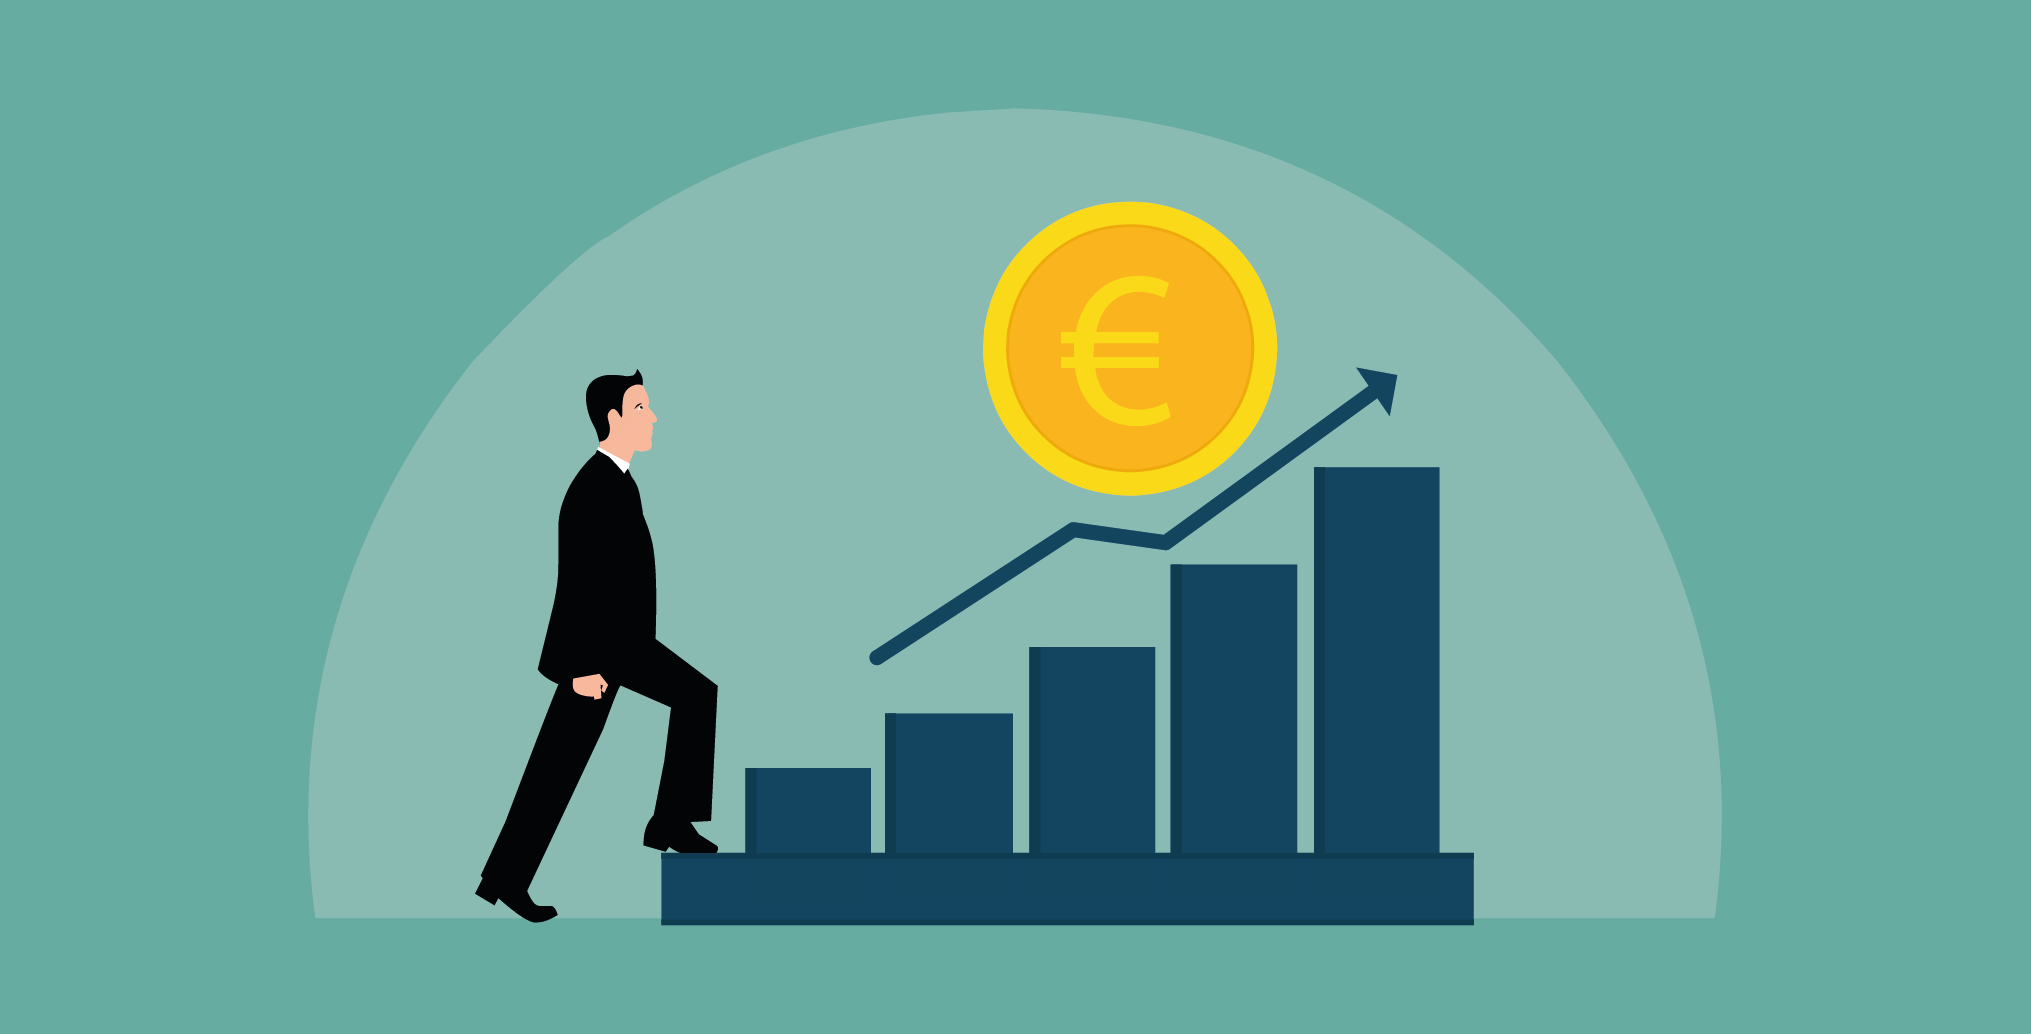 illustration of man climbing steps to acheive more money